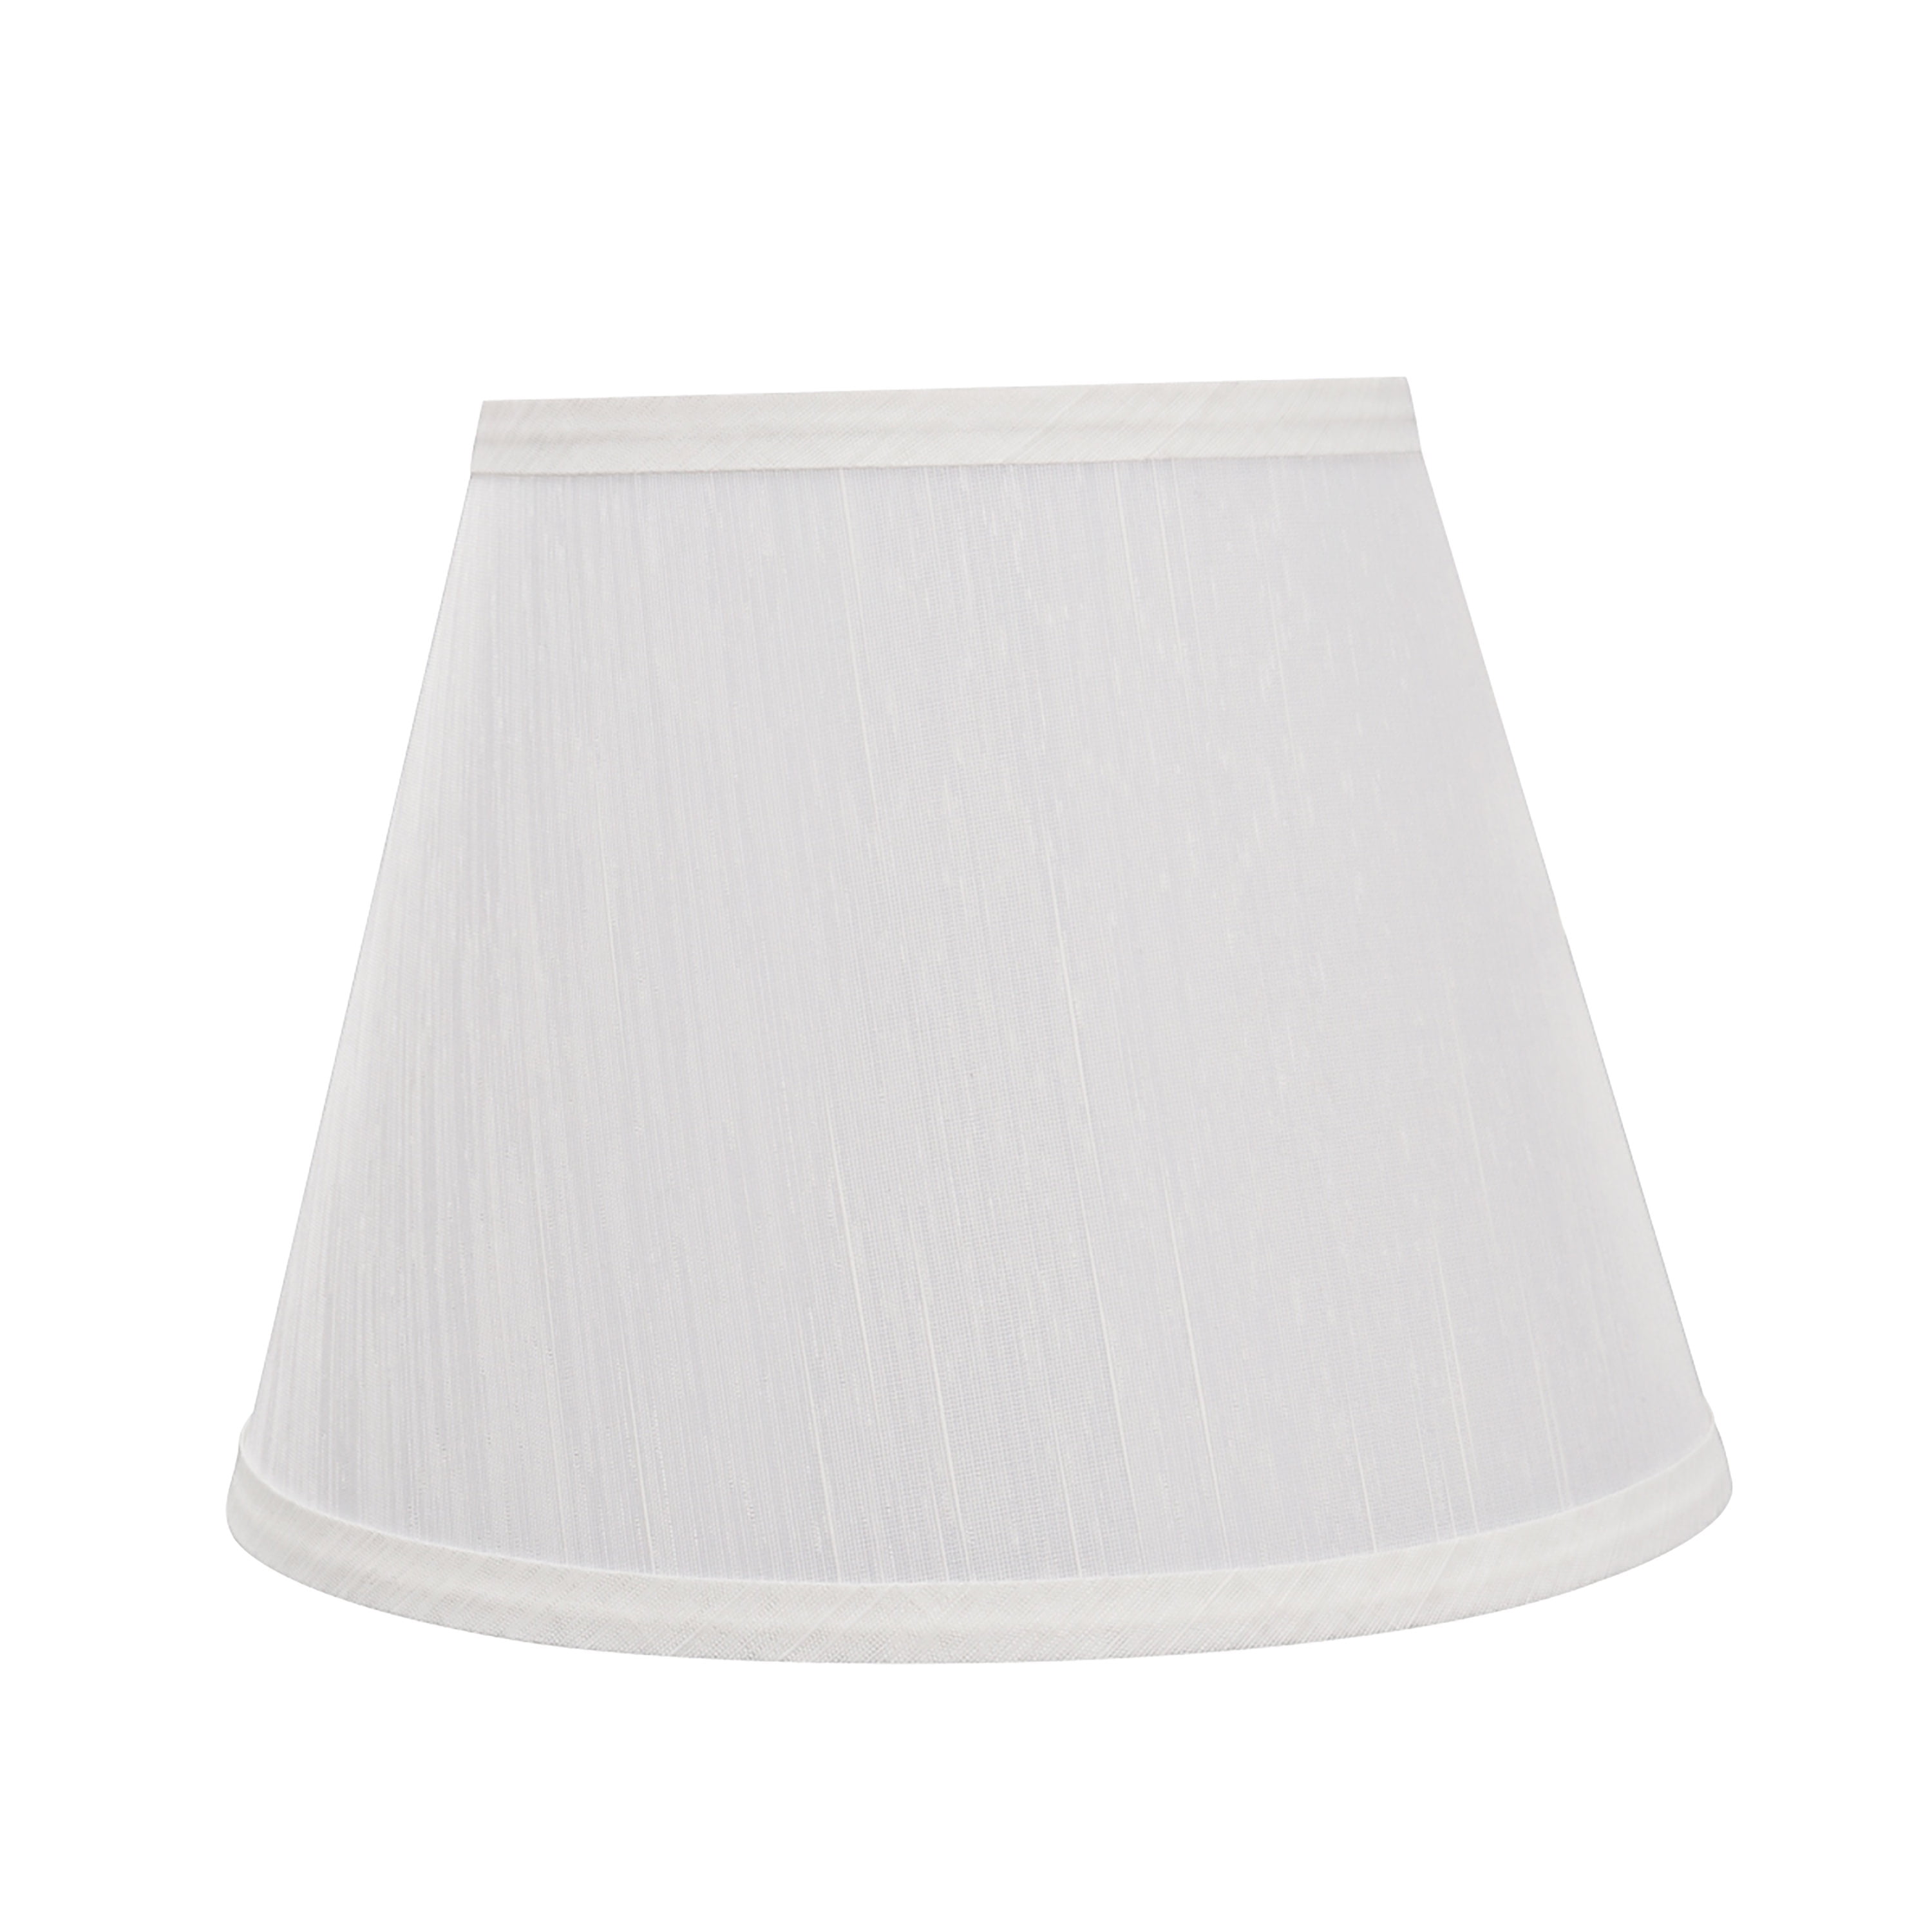 13 Wide 7 x 13 x 9 1/2 Spider Construction Lamp Shade Off White 13 Wide 7 x 13 x 9 1/2 Spider Construction Lamp Shade Off White Aspen Creative 32685 Transitional Hardback Empire Shaped in